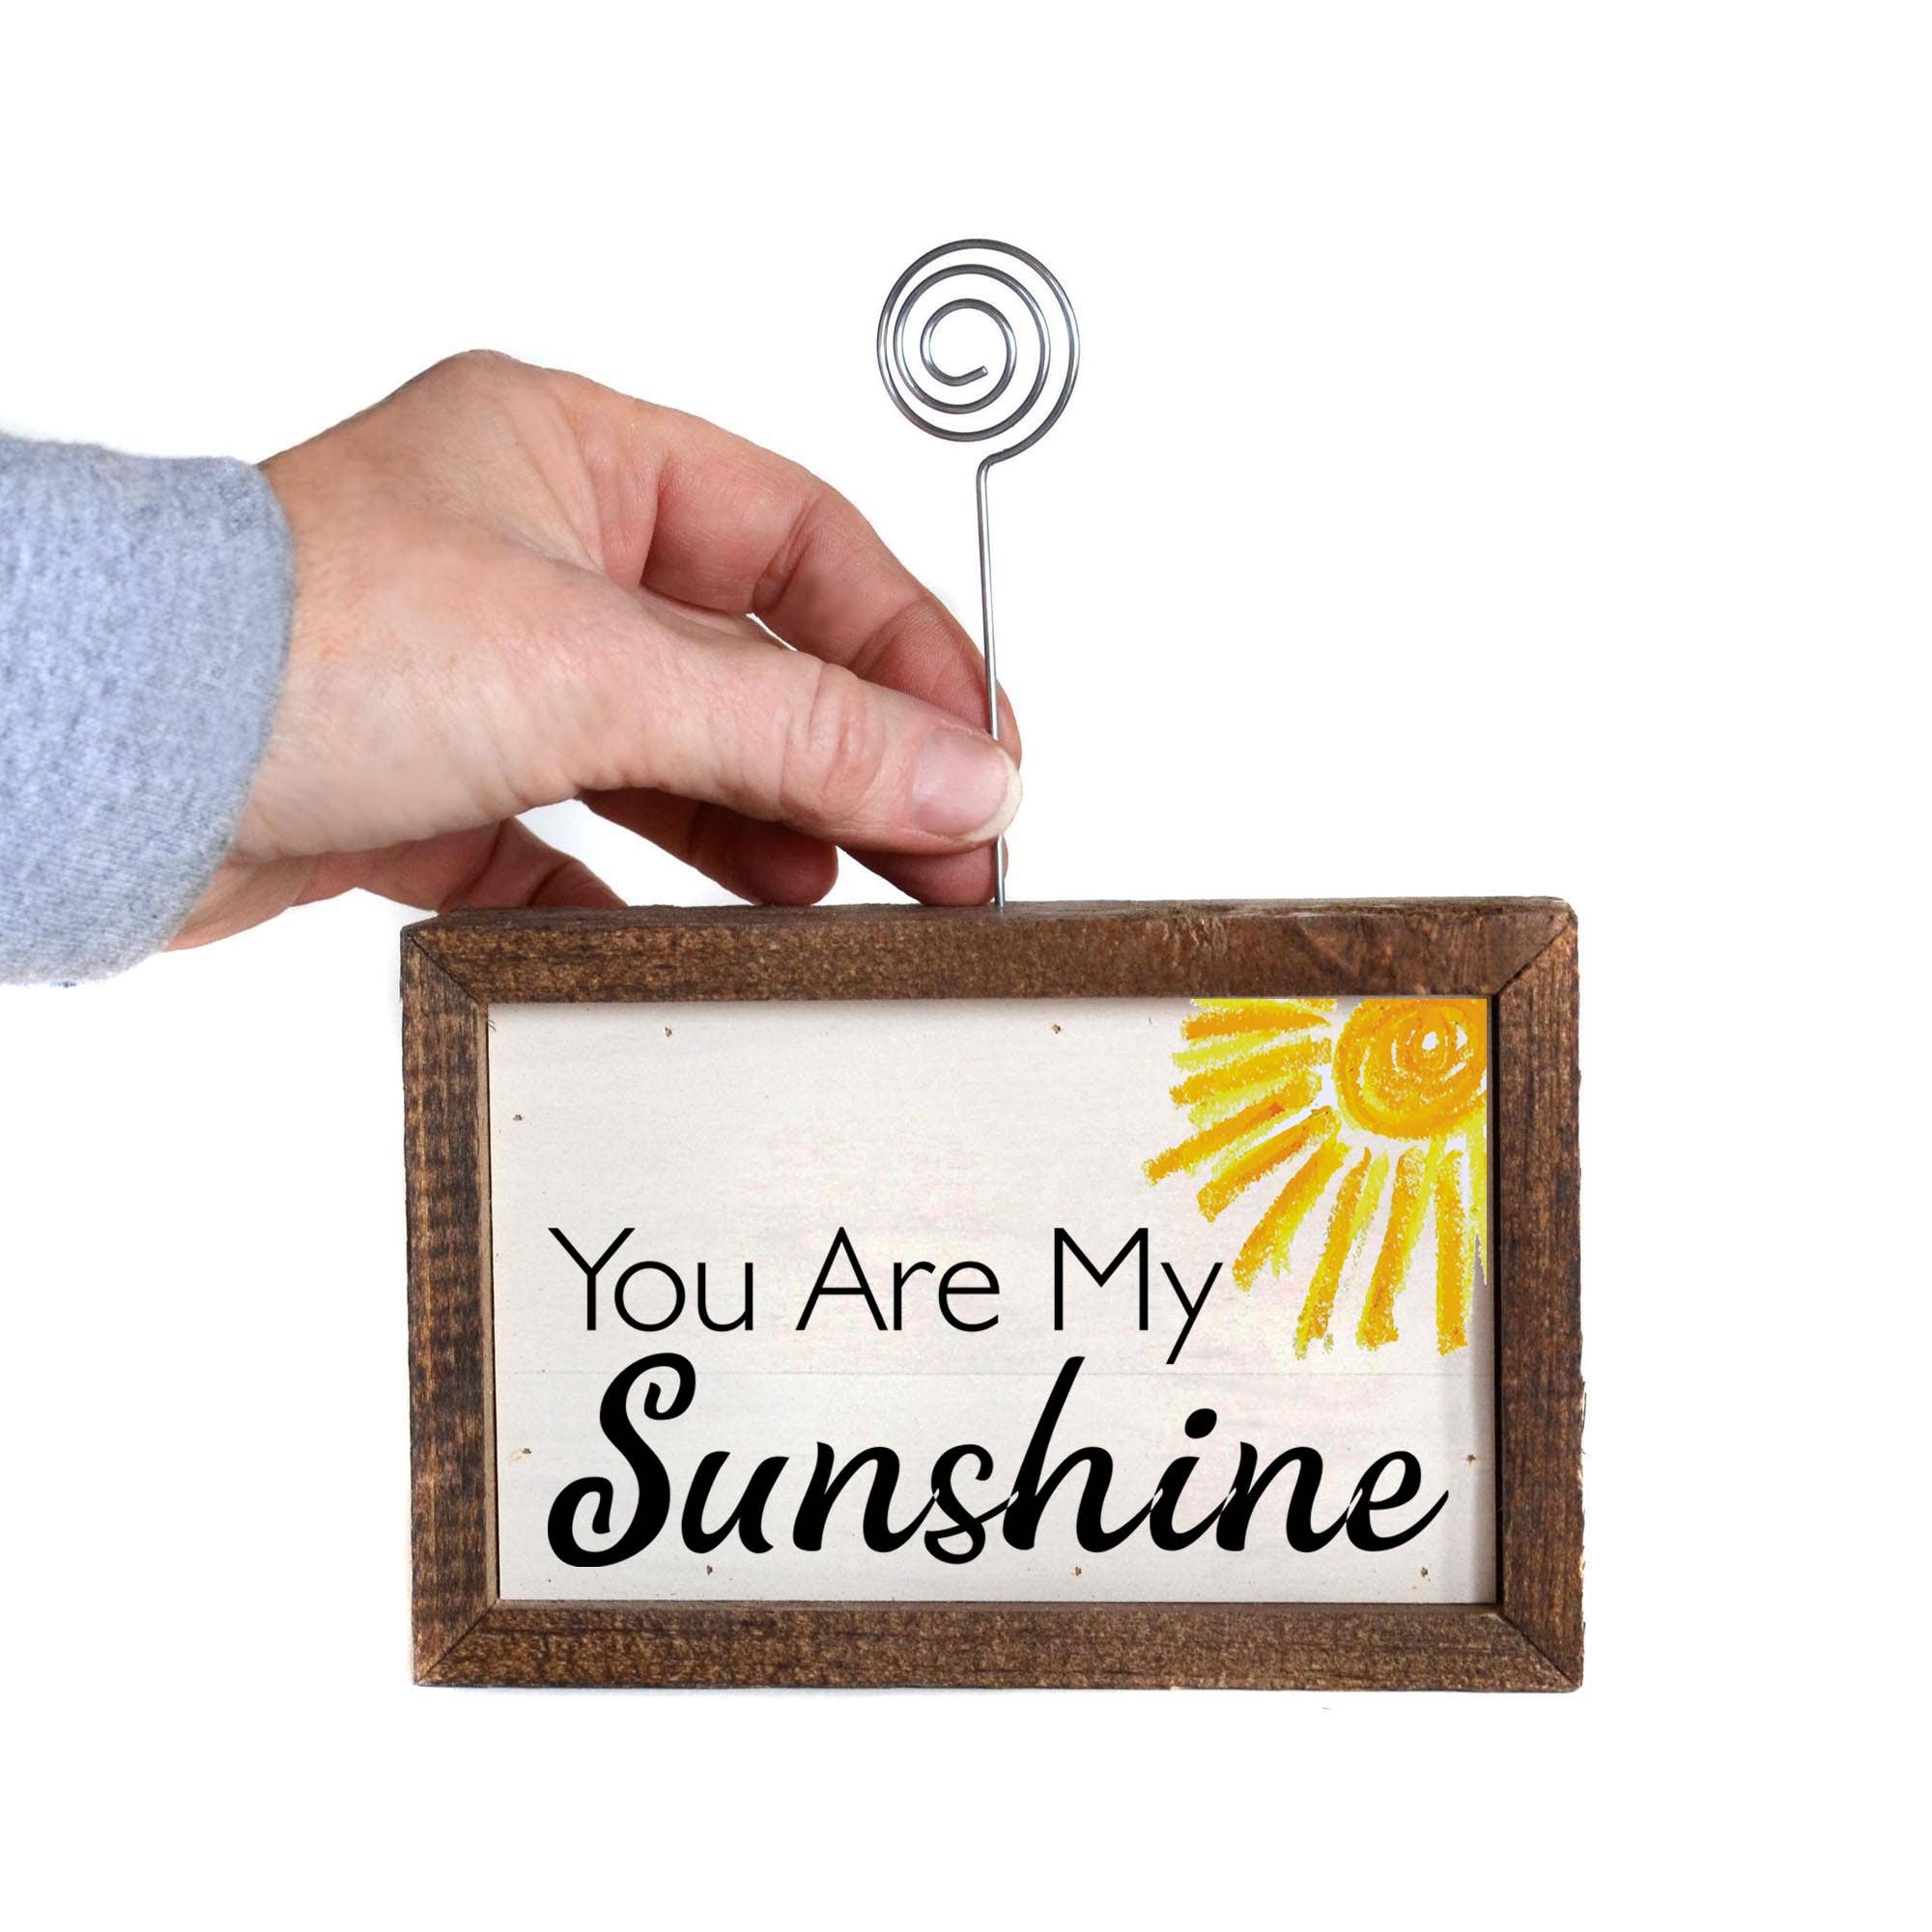 You Are My Sunshine Tabletop Picture Frame Block